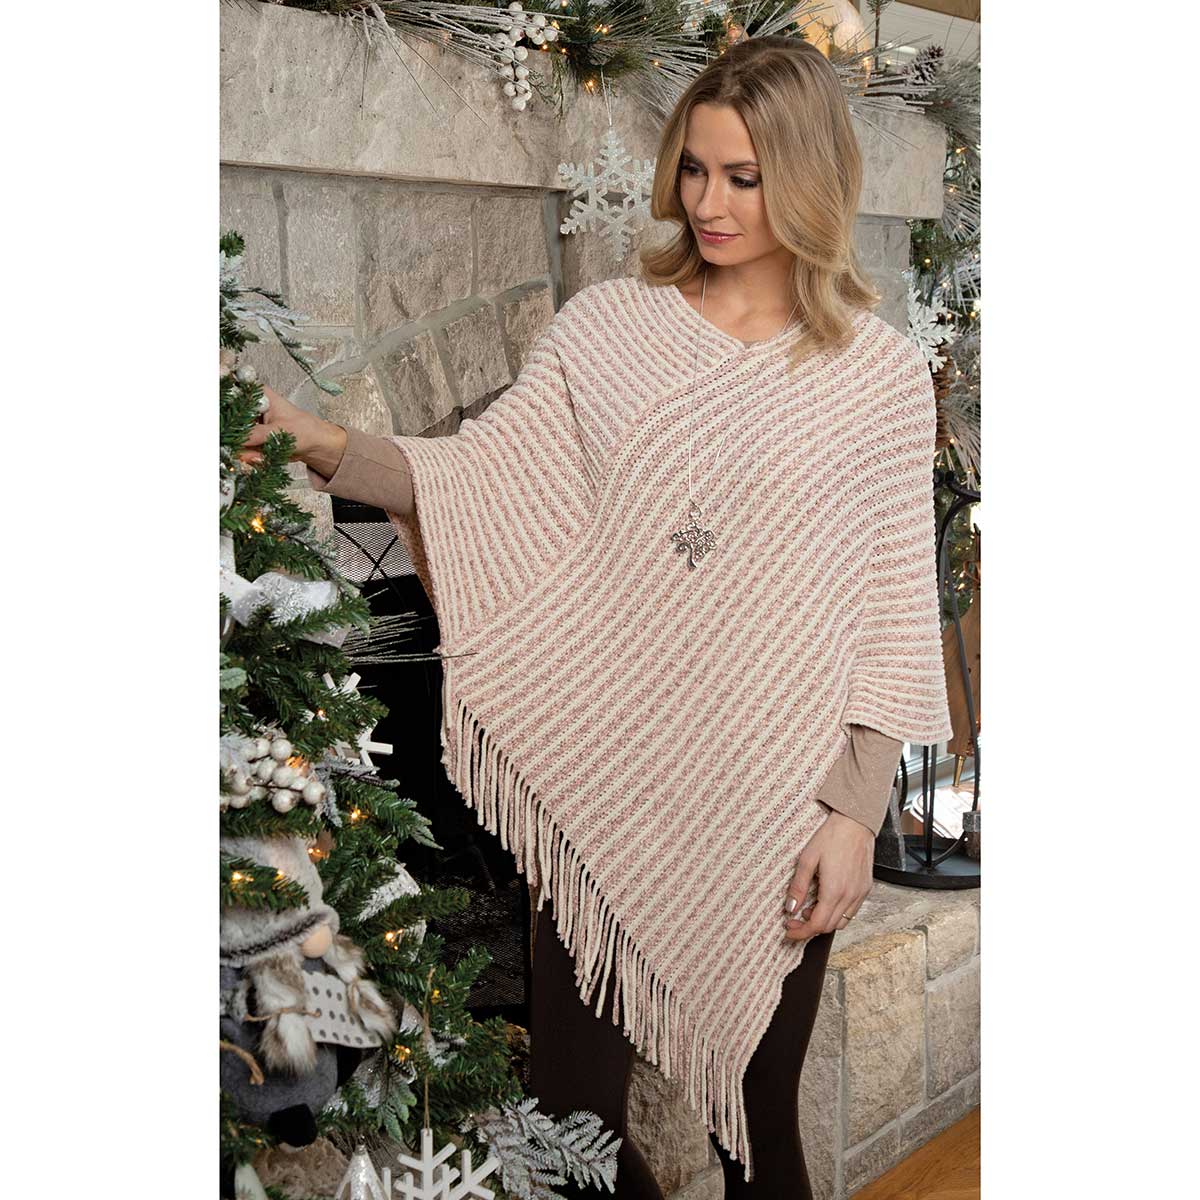 Rose and Cream Stripe Knit Chenille Poncho with Fringe 36"x36"